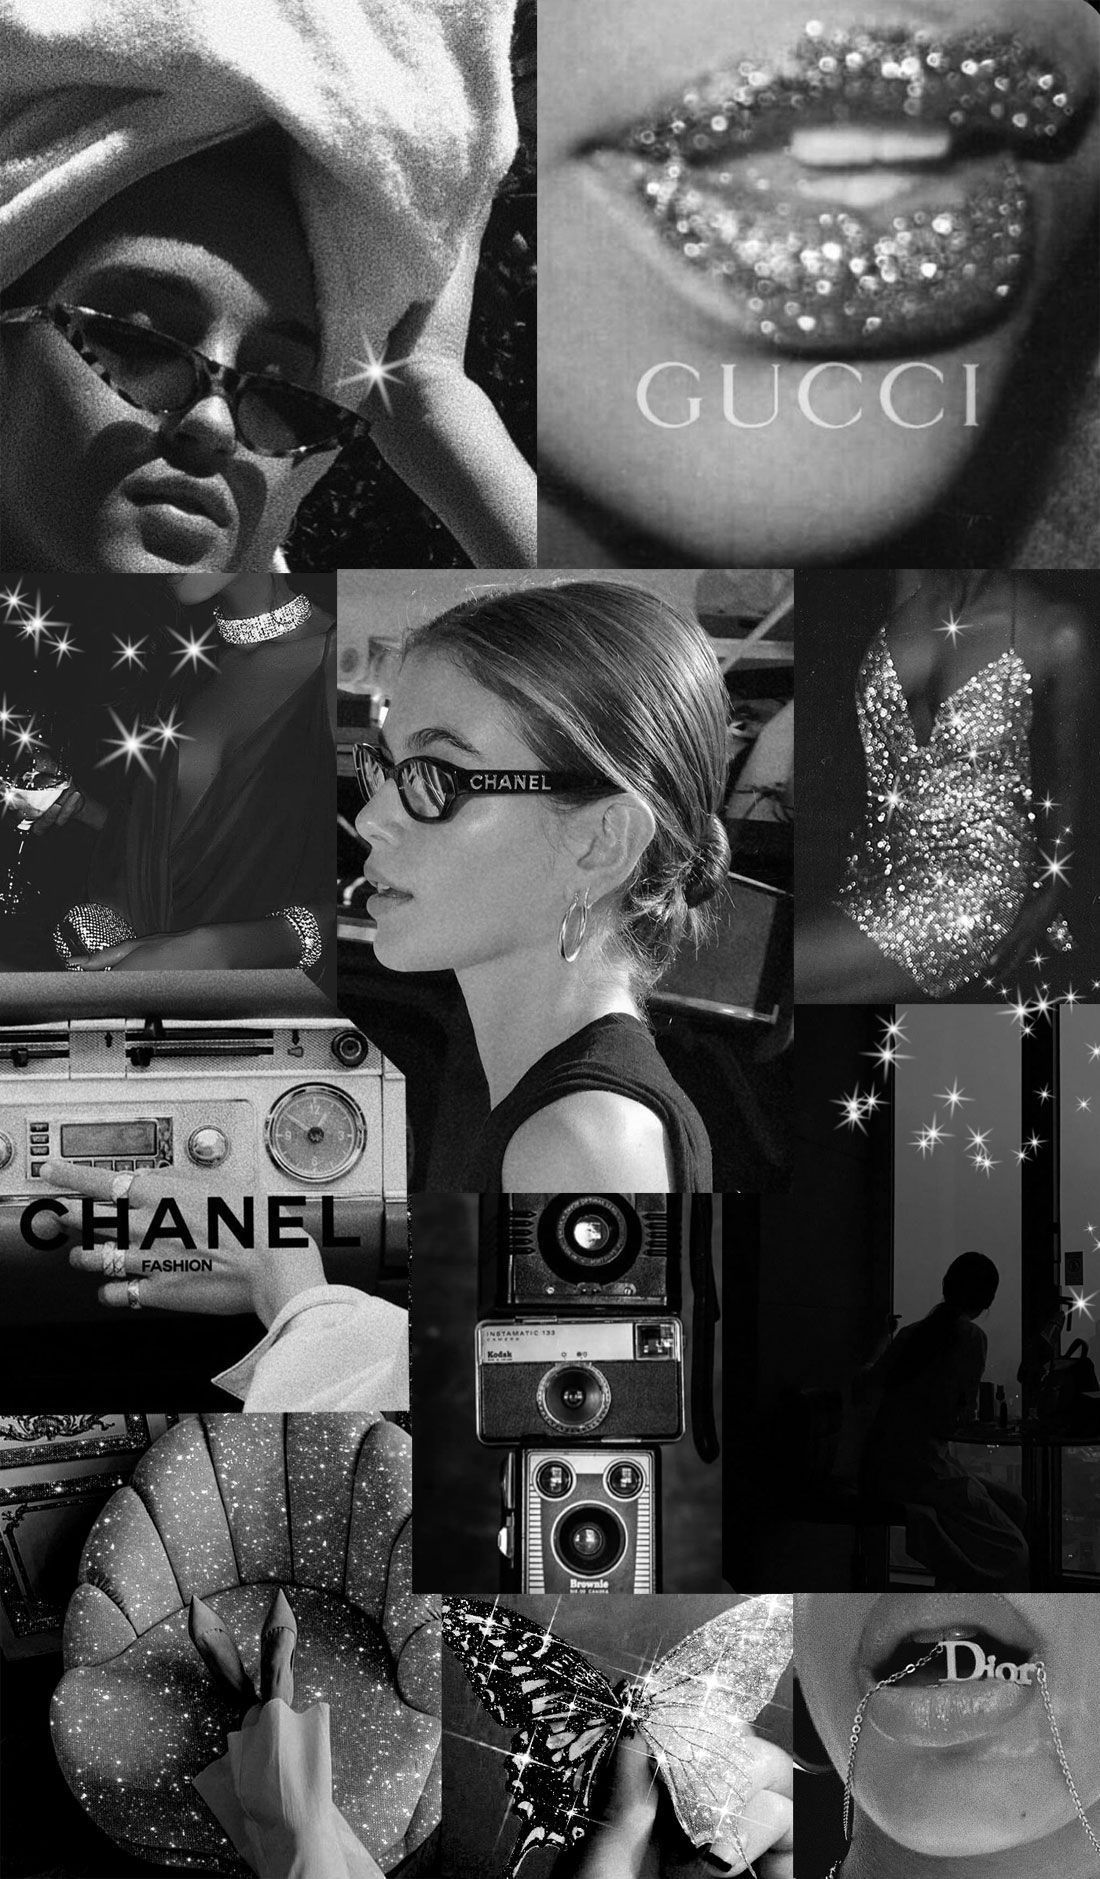 A collage of pictures with the words gucci and chanel - White, gray, photography, Dior, fashion, bling, black quotes, couple, Vogue, Chanel, collage, Gucci